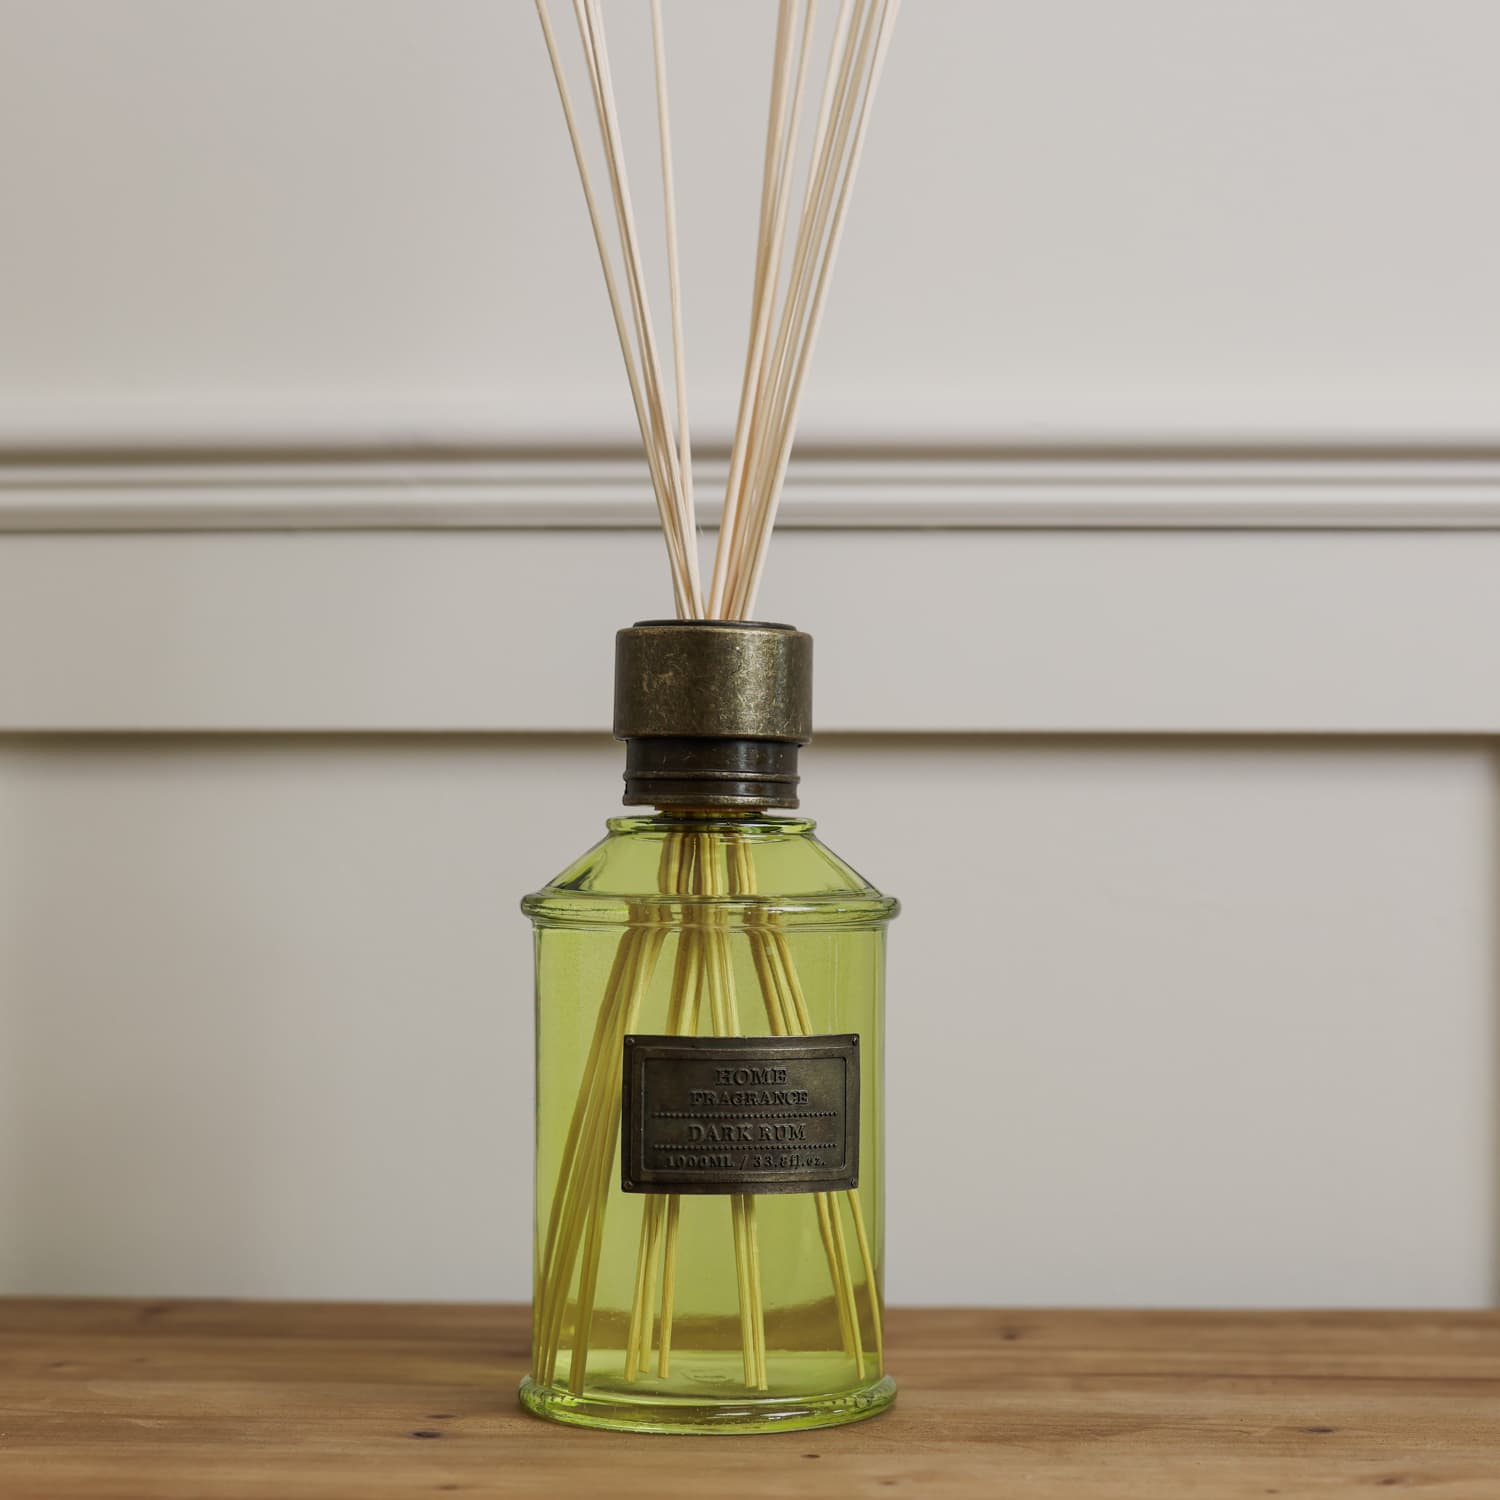 Home fragrance dark rum and lime green reed diffuser on wooden console